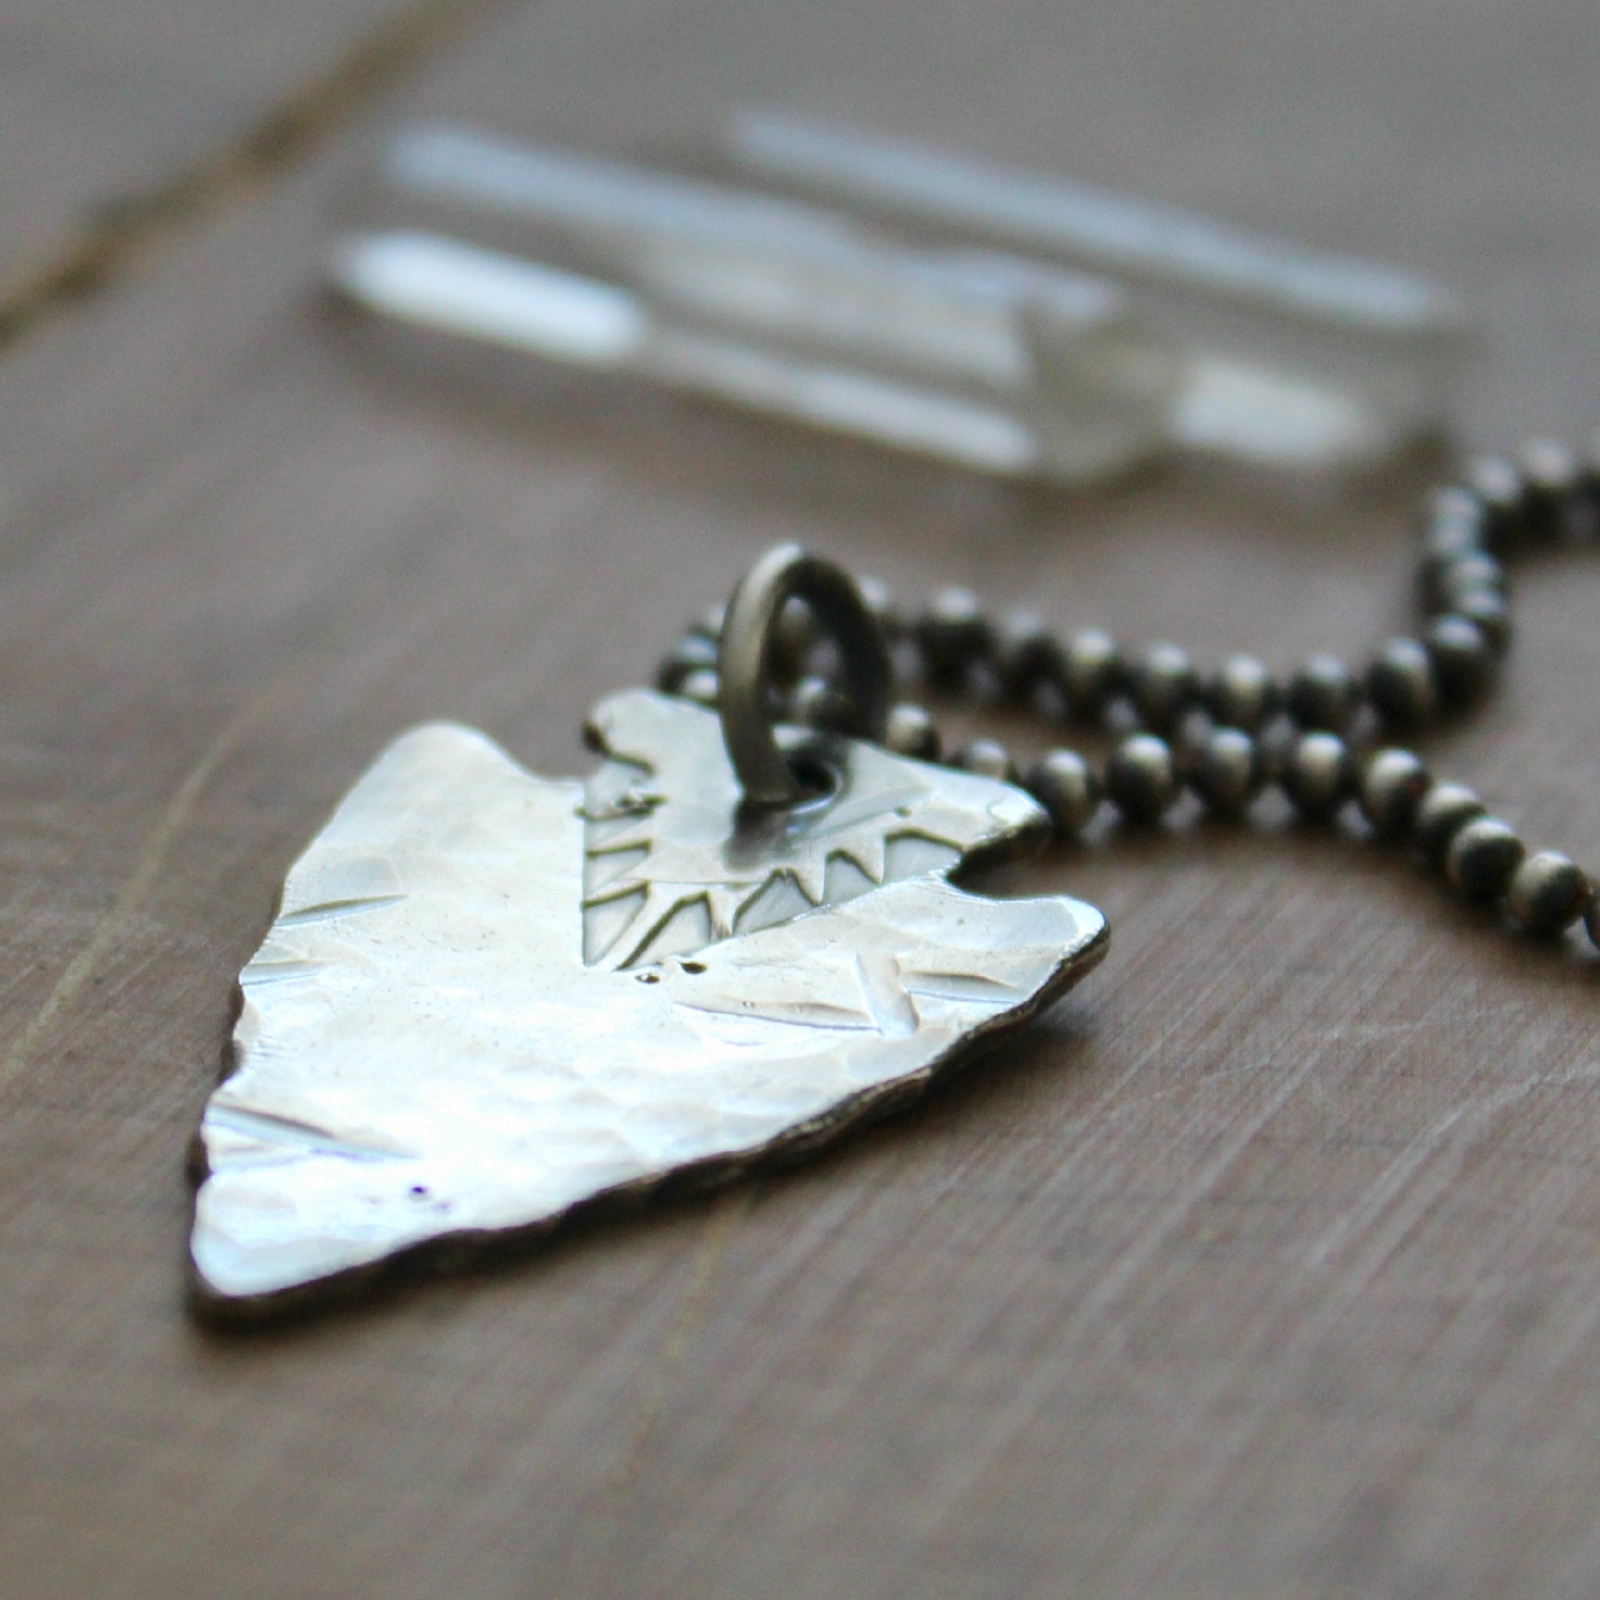 Amazon.com: Arrowhead Necklace Stainless Steel - Gift Box included - For Men,  Women, Teens : Handmade Products